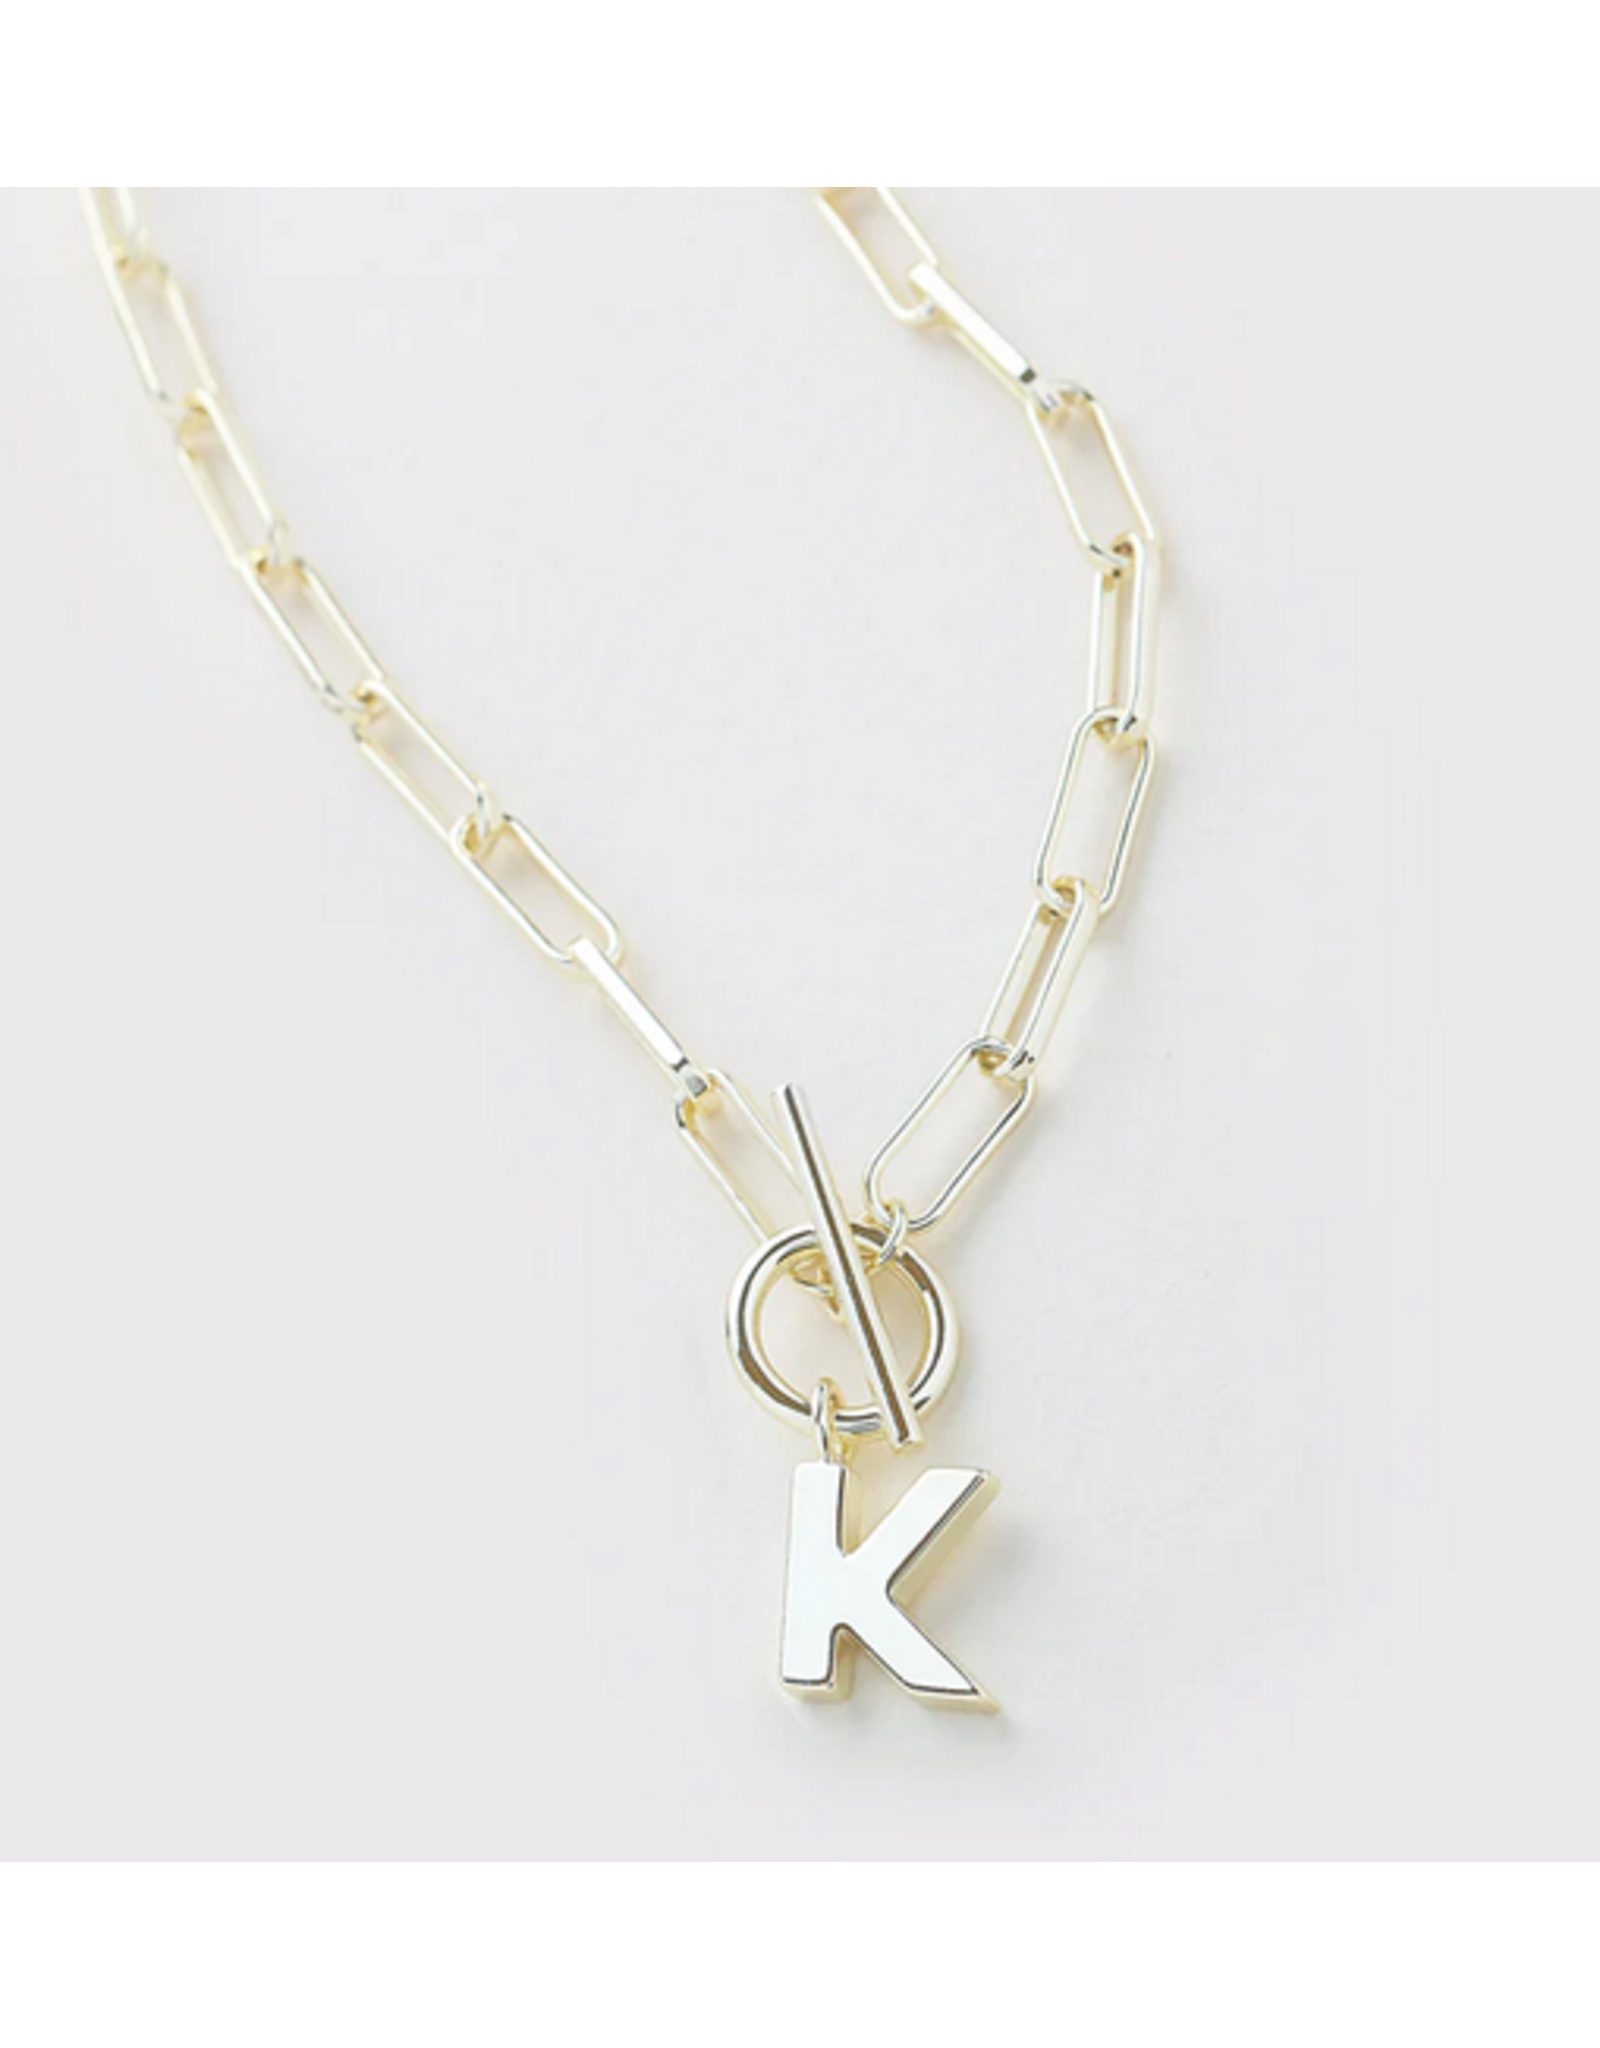 Toggle Initial Necklace – Natalie Wood Designs